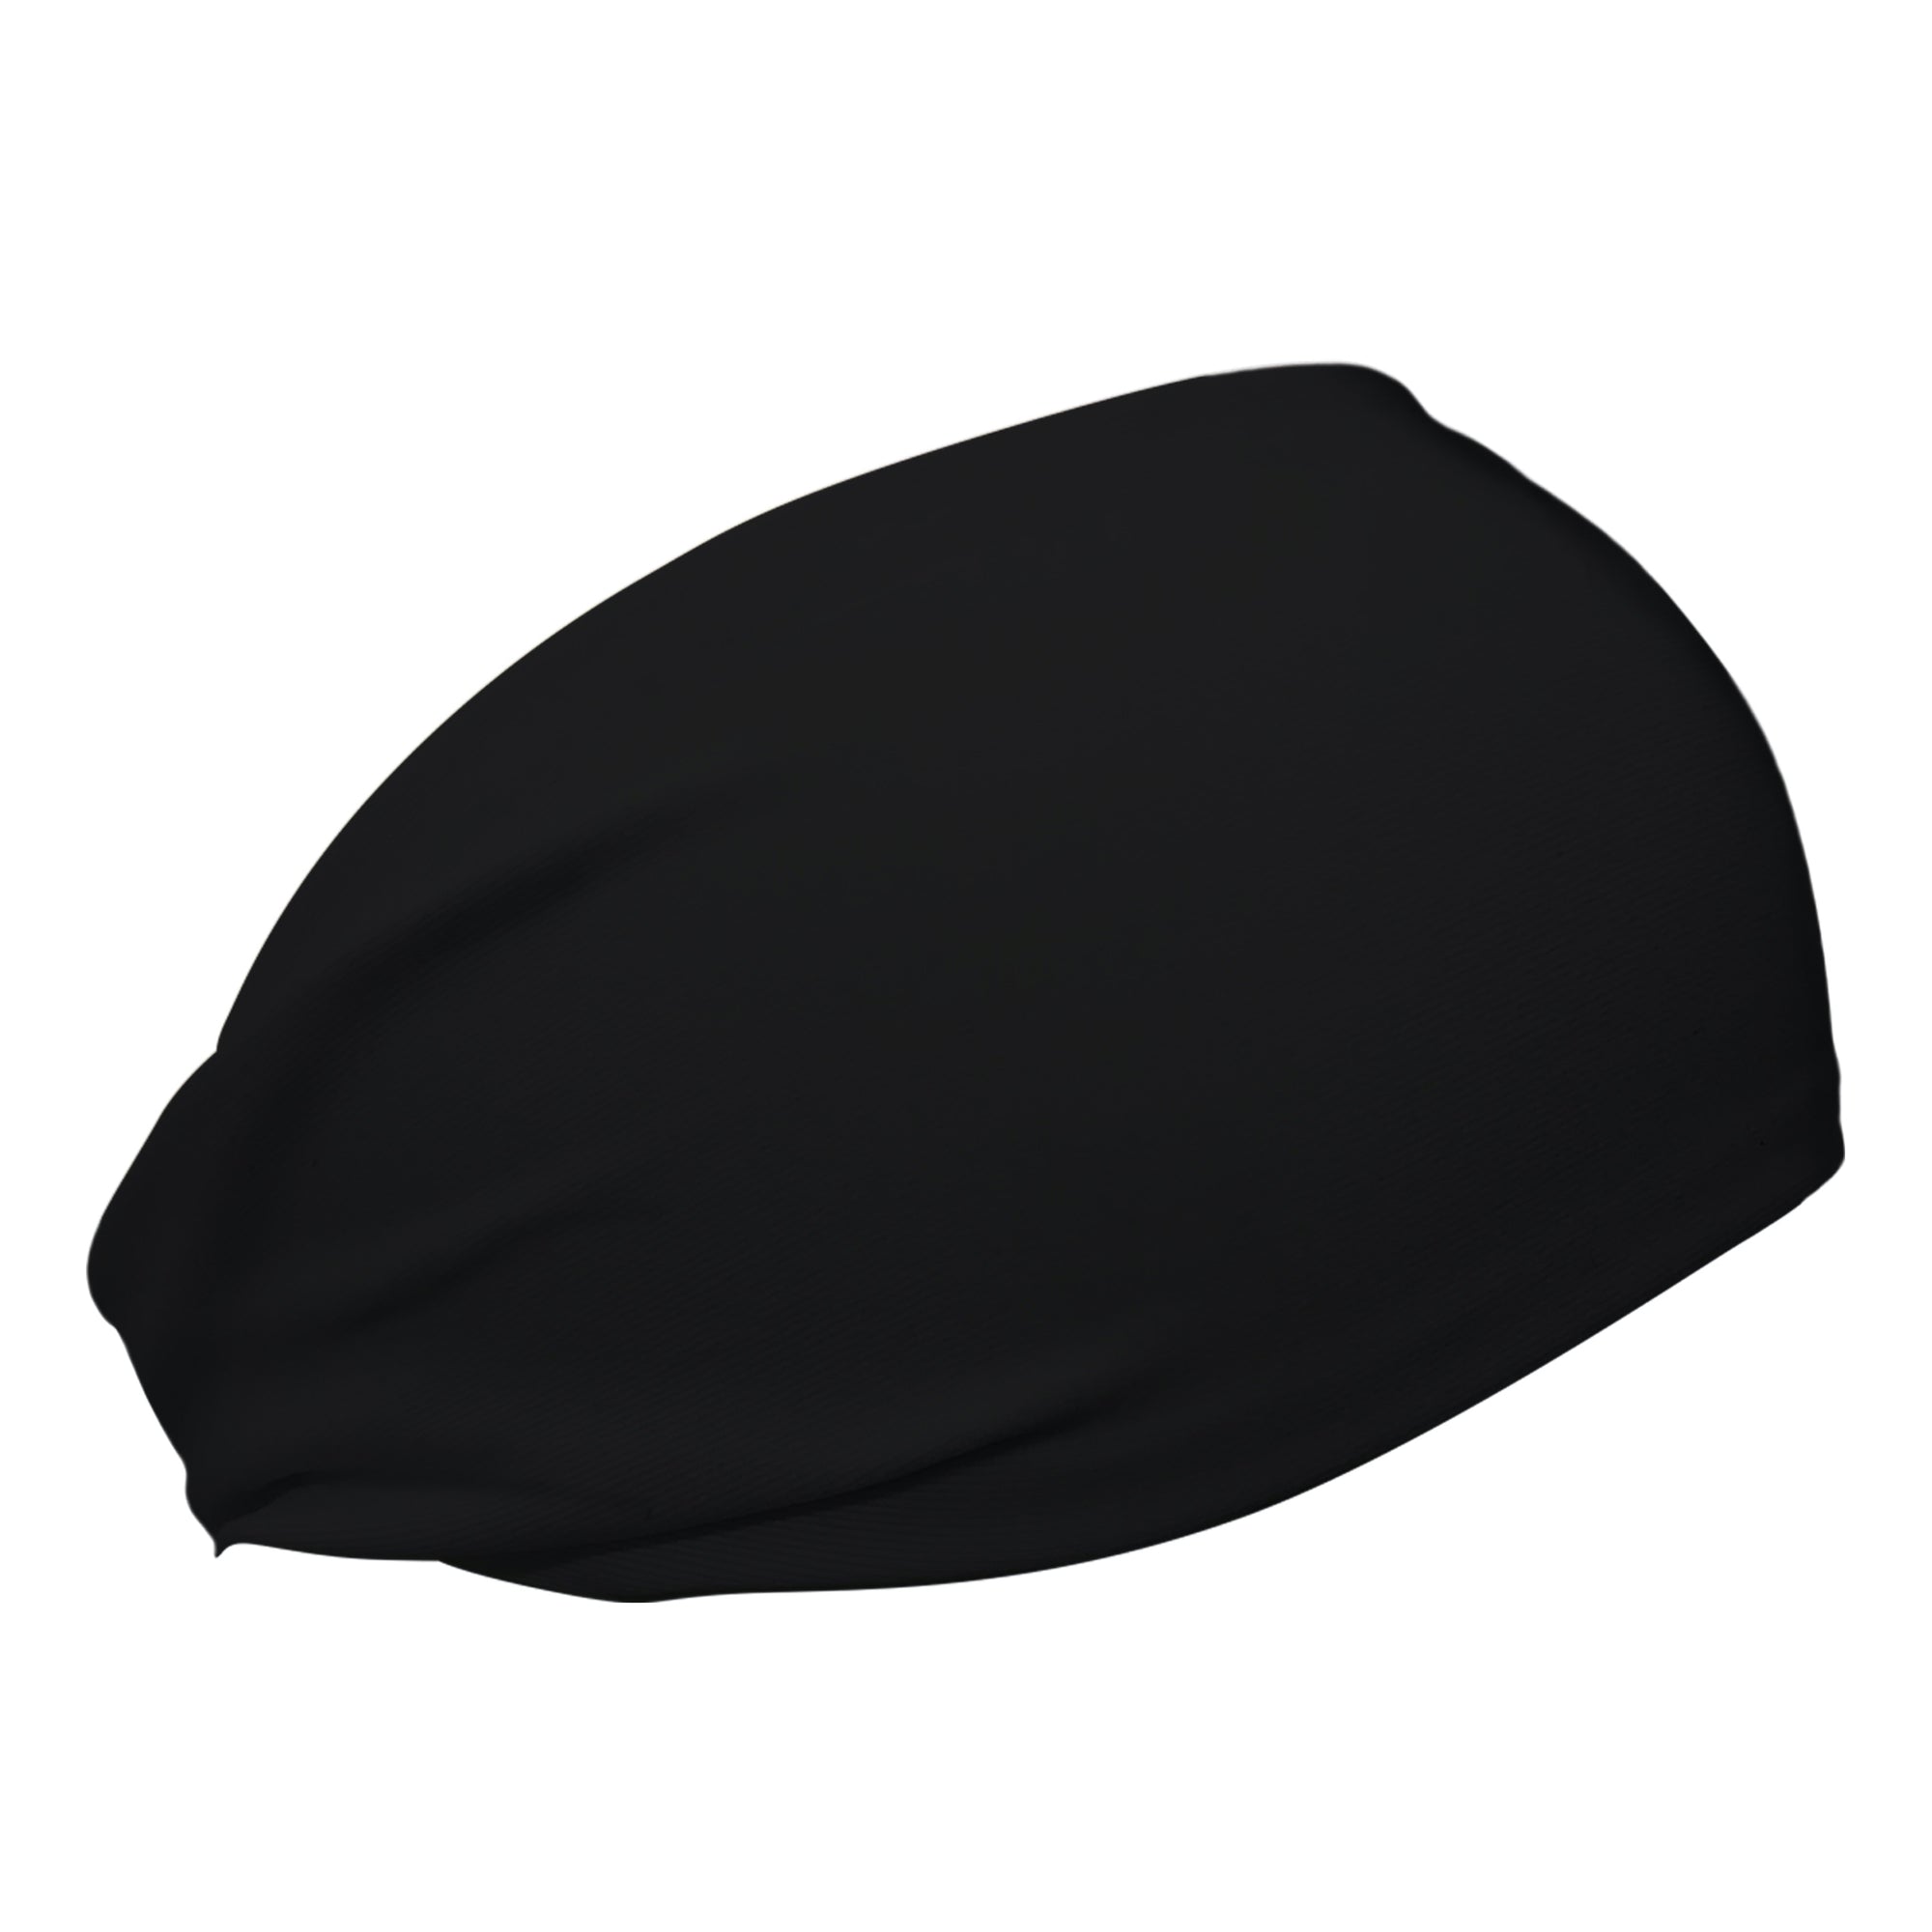 Black cooling headband 4 inches wide at front and tapers to 1.25 inches wide at back for best fit. Non-slip headband made with Coolcore cooling fabric. Great sweat wicking cooling headband. Made in USA black headband.